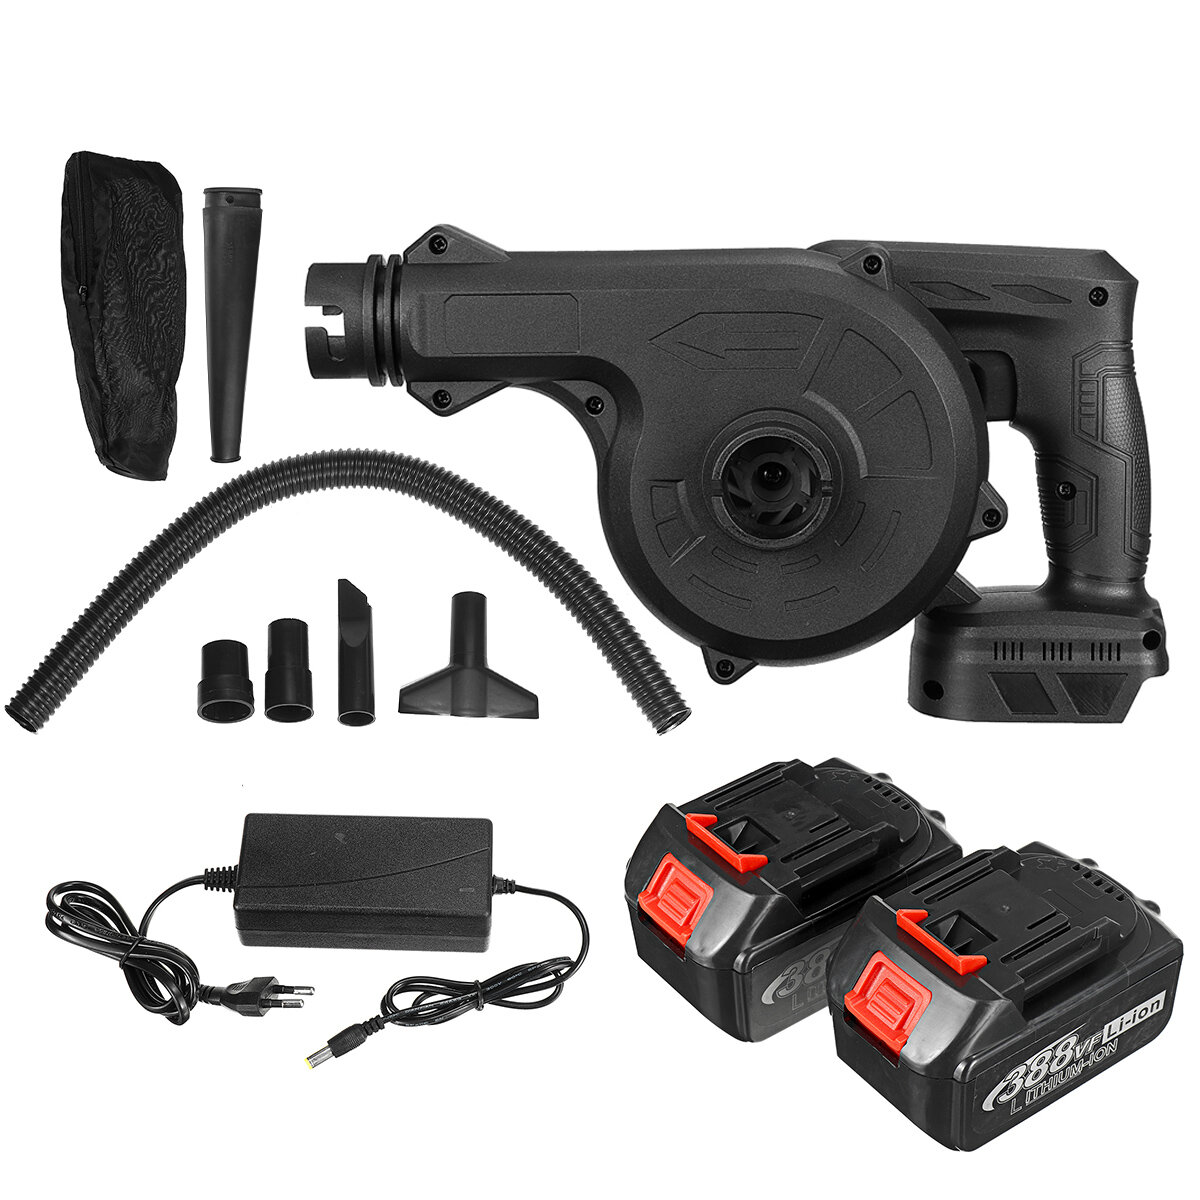 Image of 1600W Cordless Electric Air Blower Vacuum Dust Cleaner Leaf Blower Blowing & Suction Tool W/ 1/2 Battery